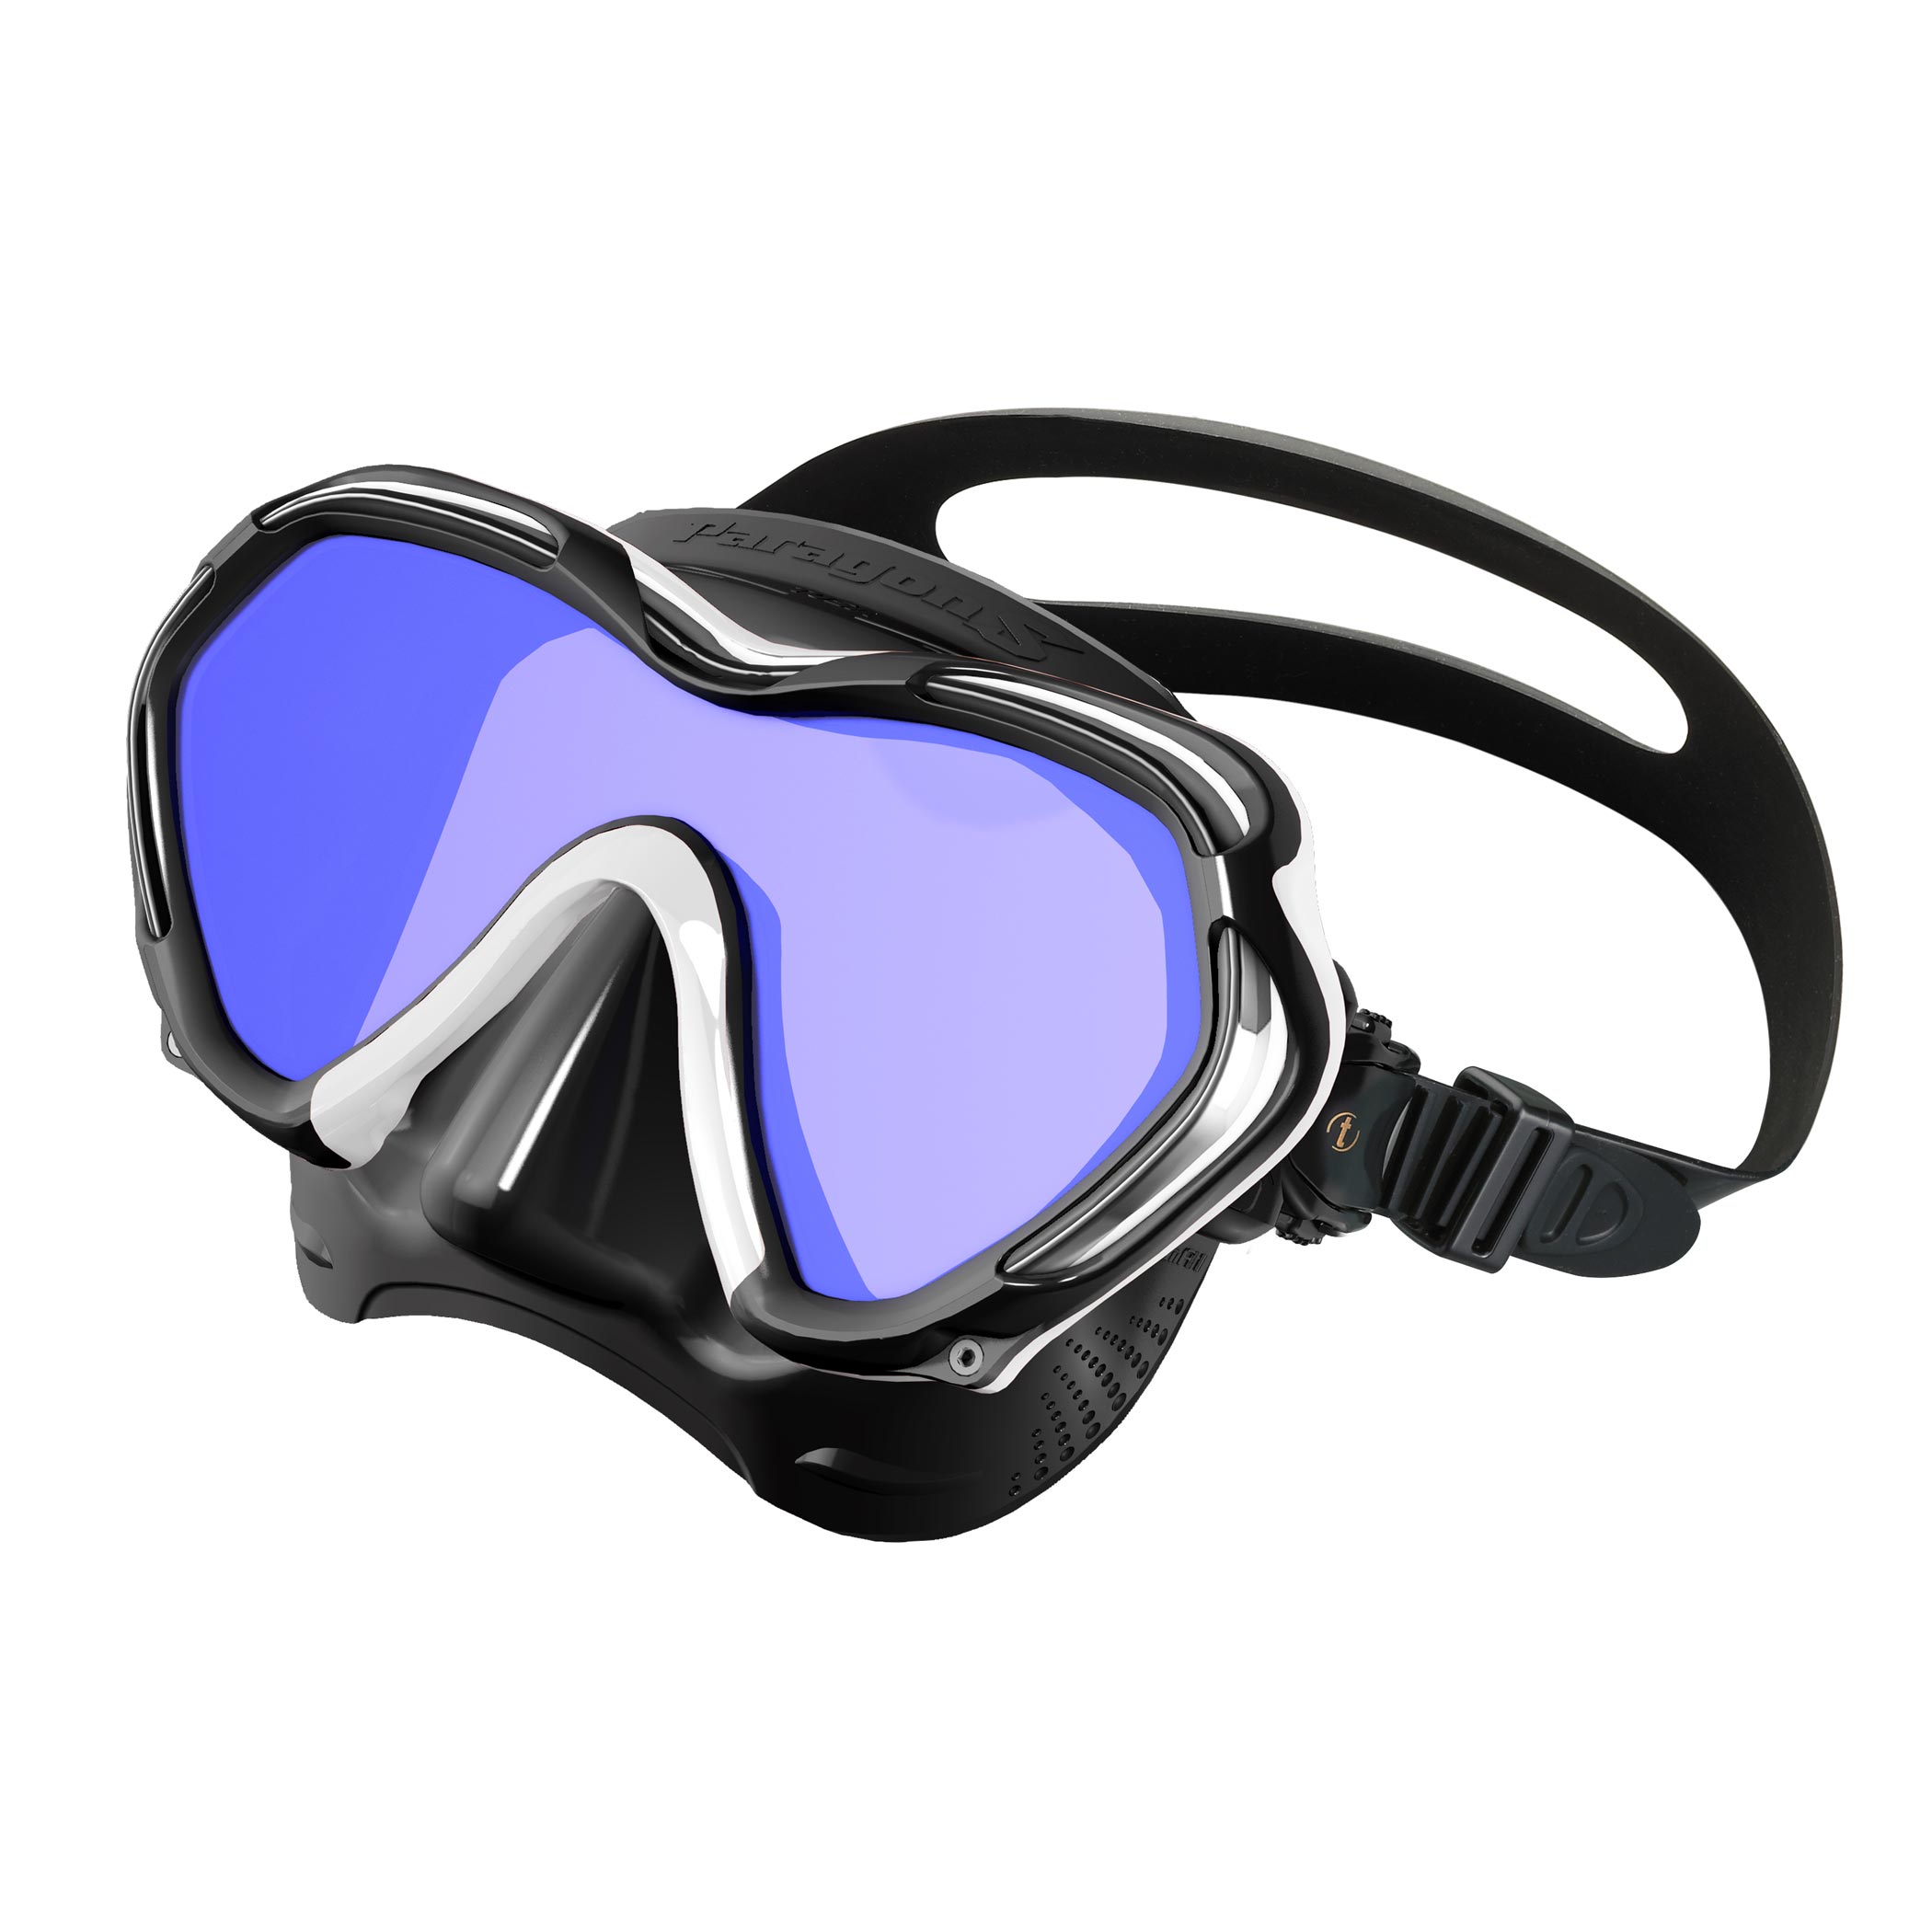 15 Day Return Policy Quality Products Enjoy Free Worldwide Shipping Scuba Gear Neoprene Dive And